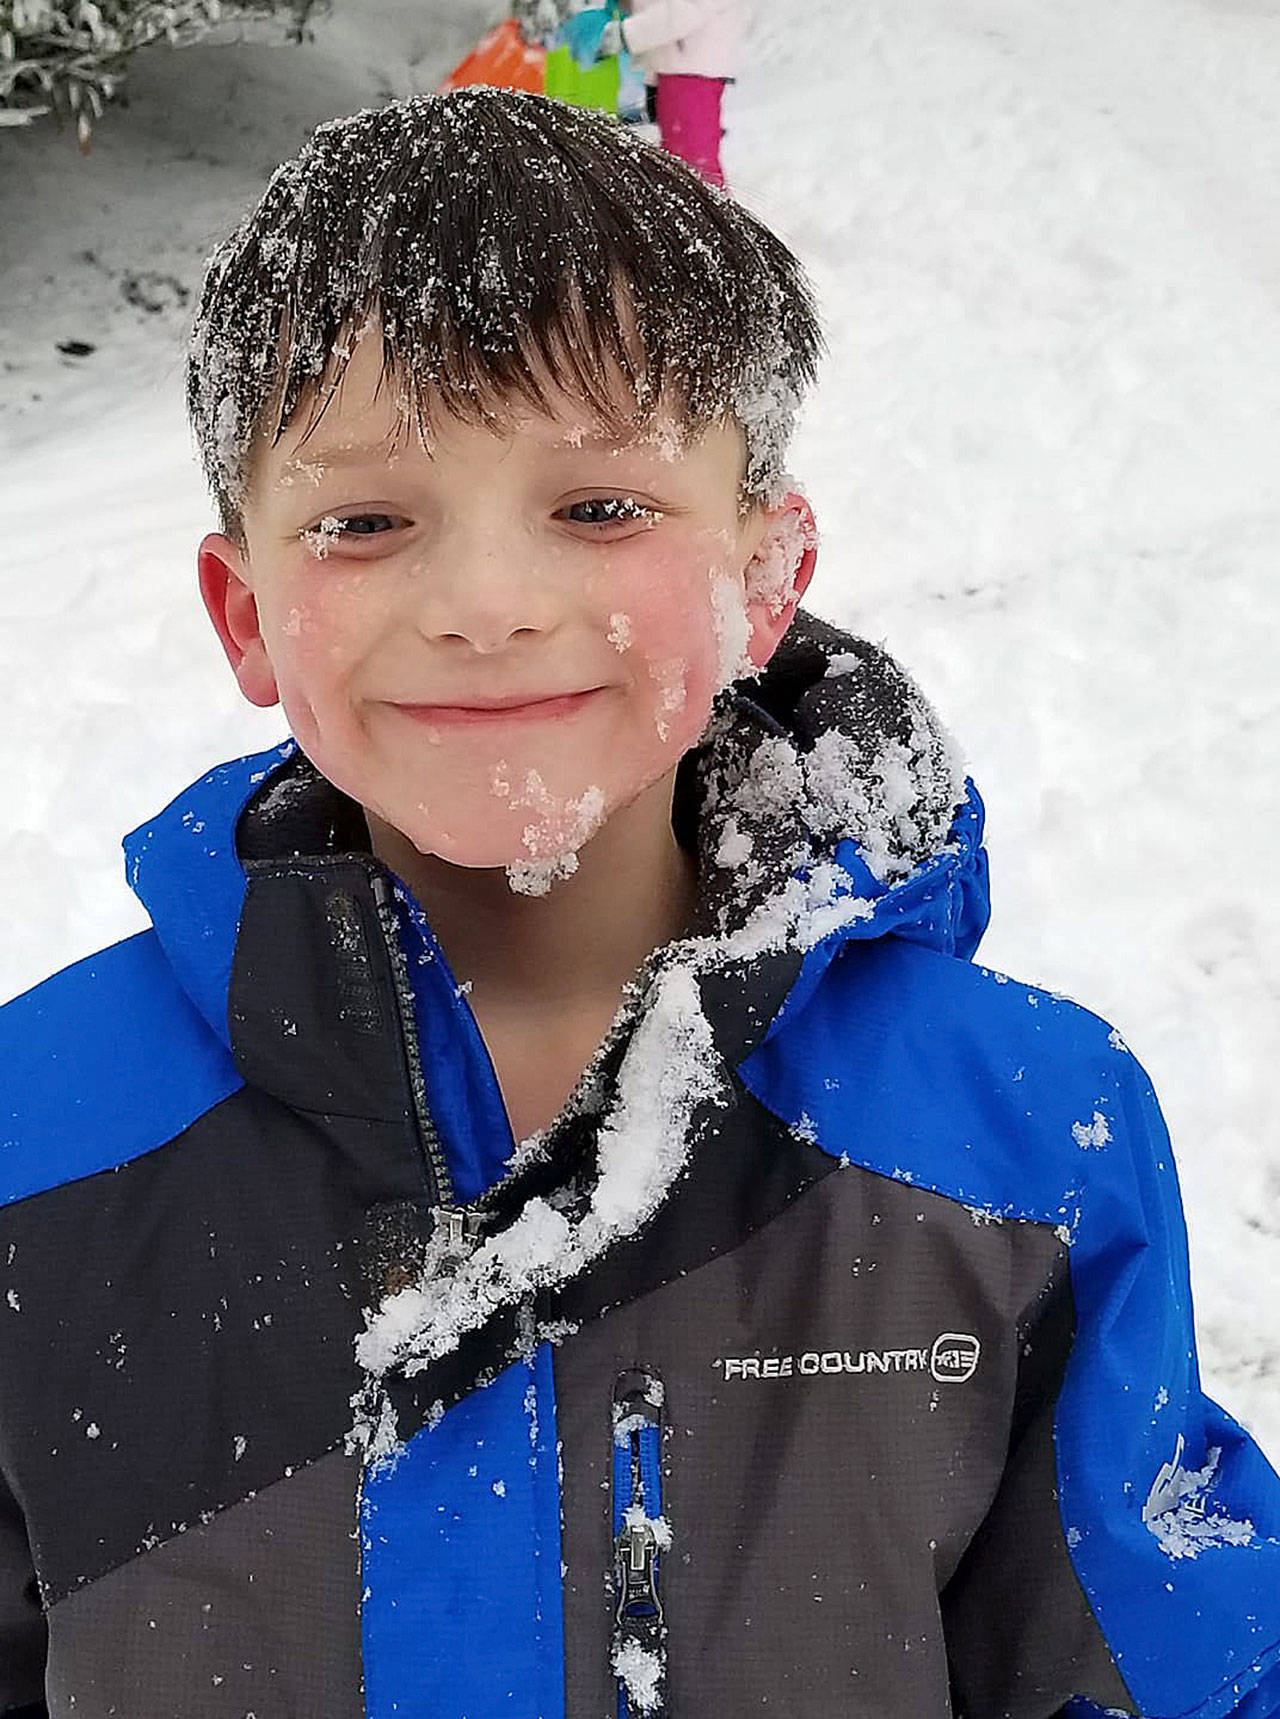 Kymy Johnson submitted this photo of second grader Parker Johnson enjoying his snow day sledding.